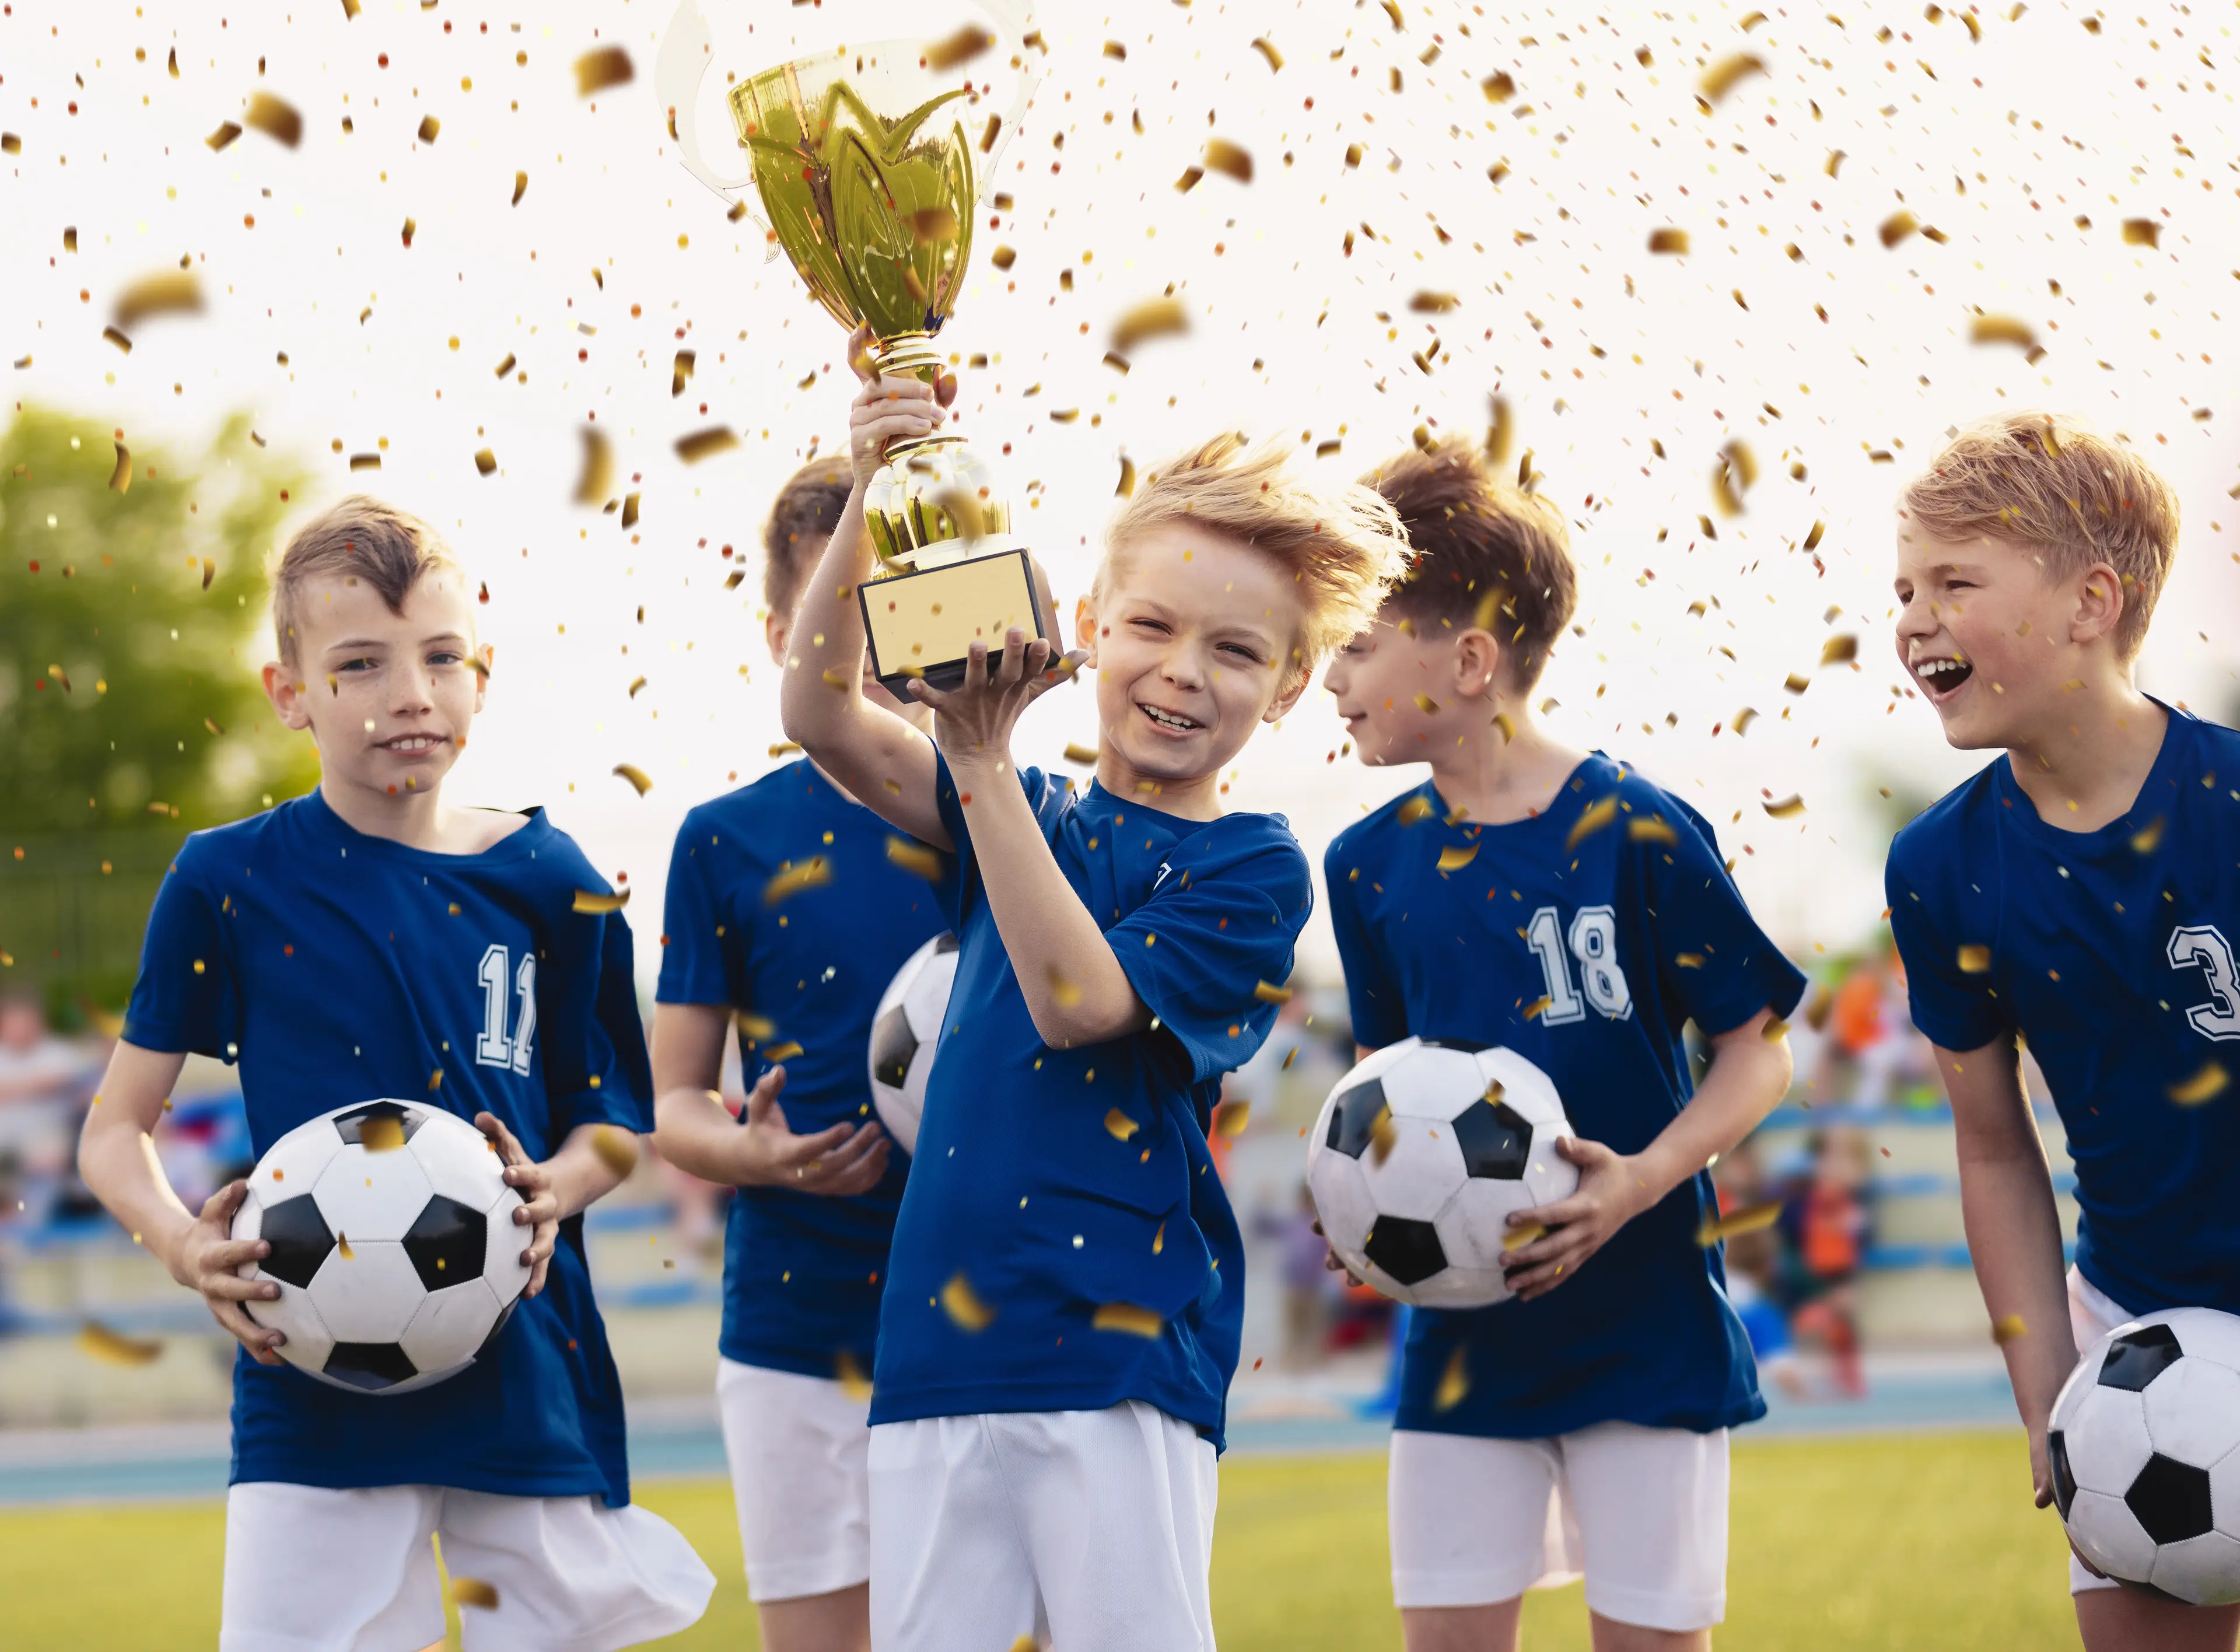 Featured image: Winning in Youth Sports